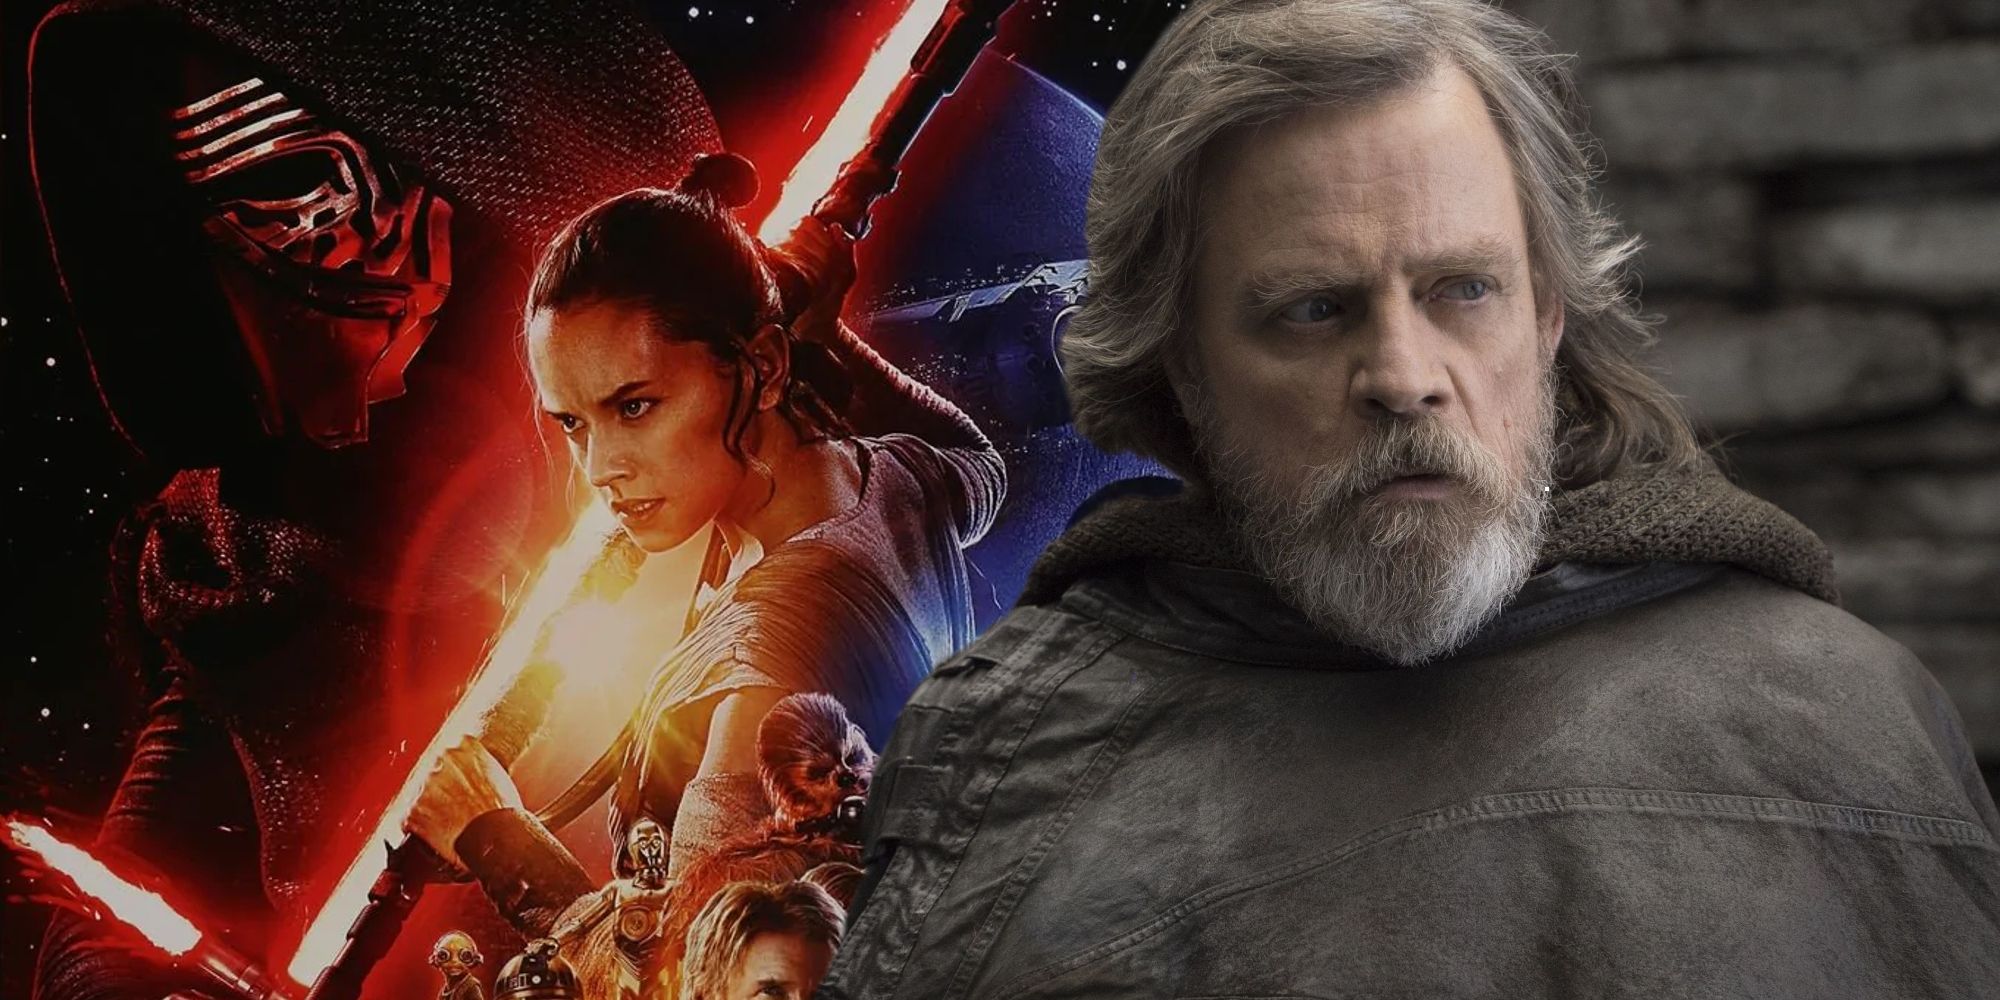 Luke Skywalker in The Last Jedi to the right of a poster of Star Wars: The Force Awakens